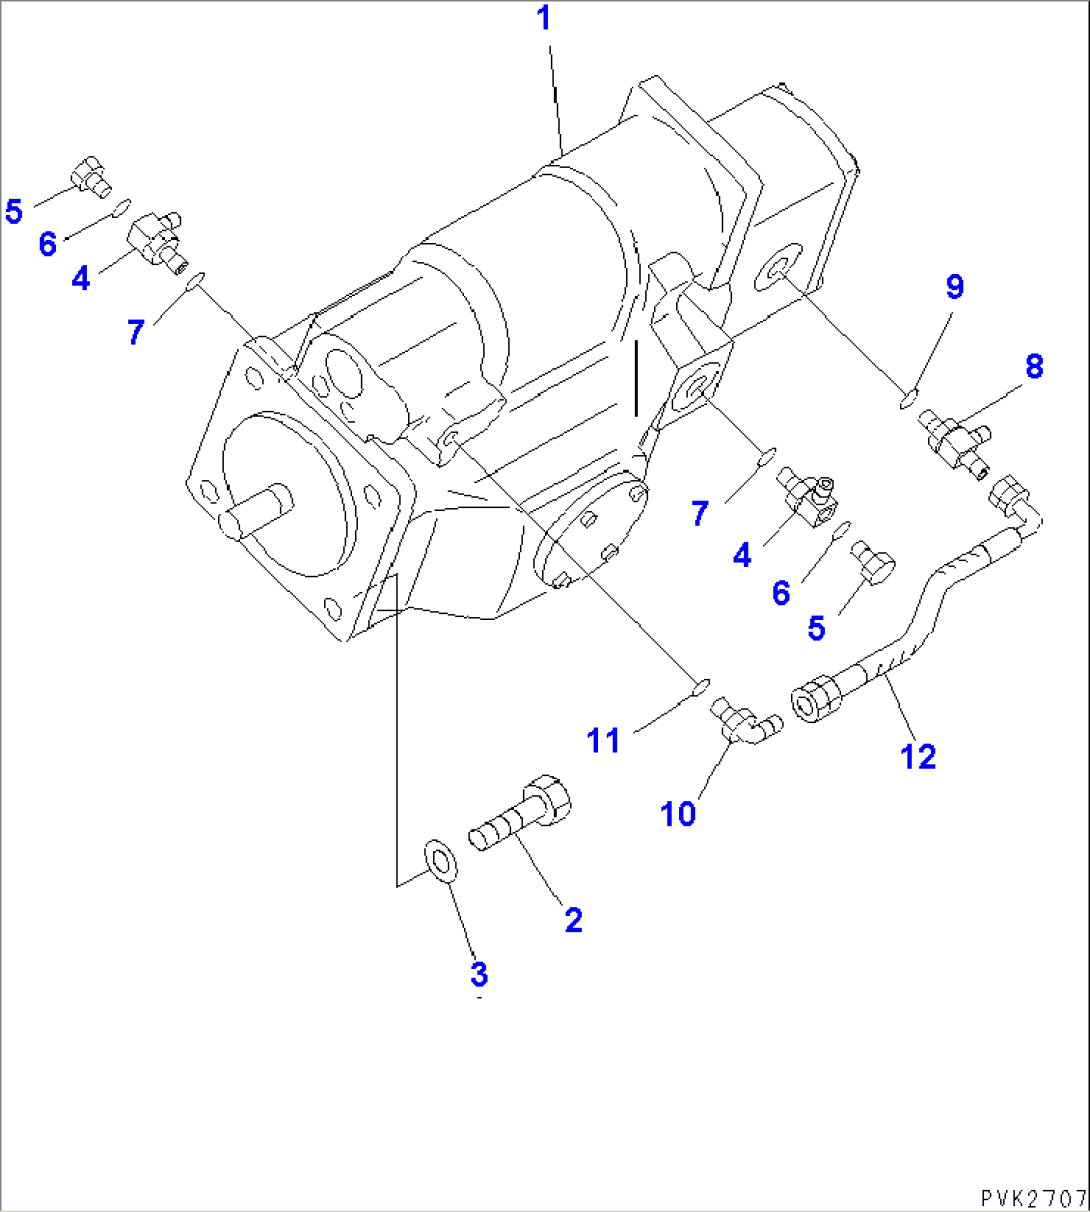 MAIN PUMP (ELBOW AND MOUNTING)